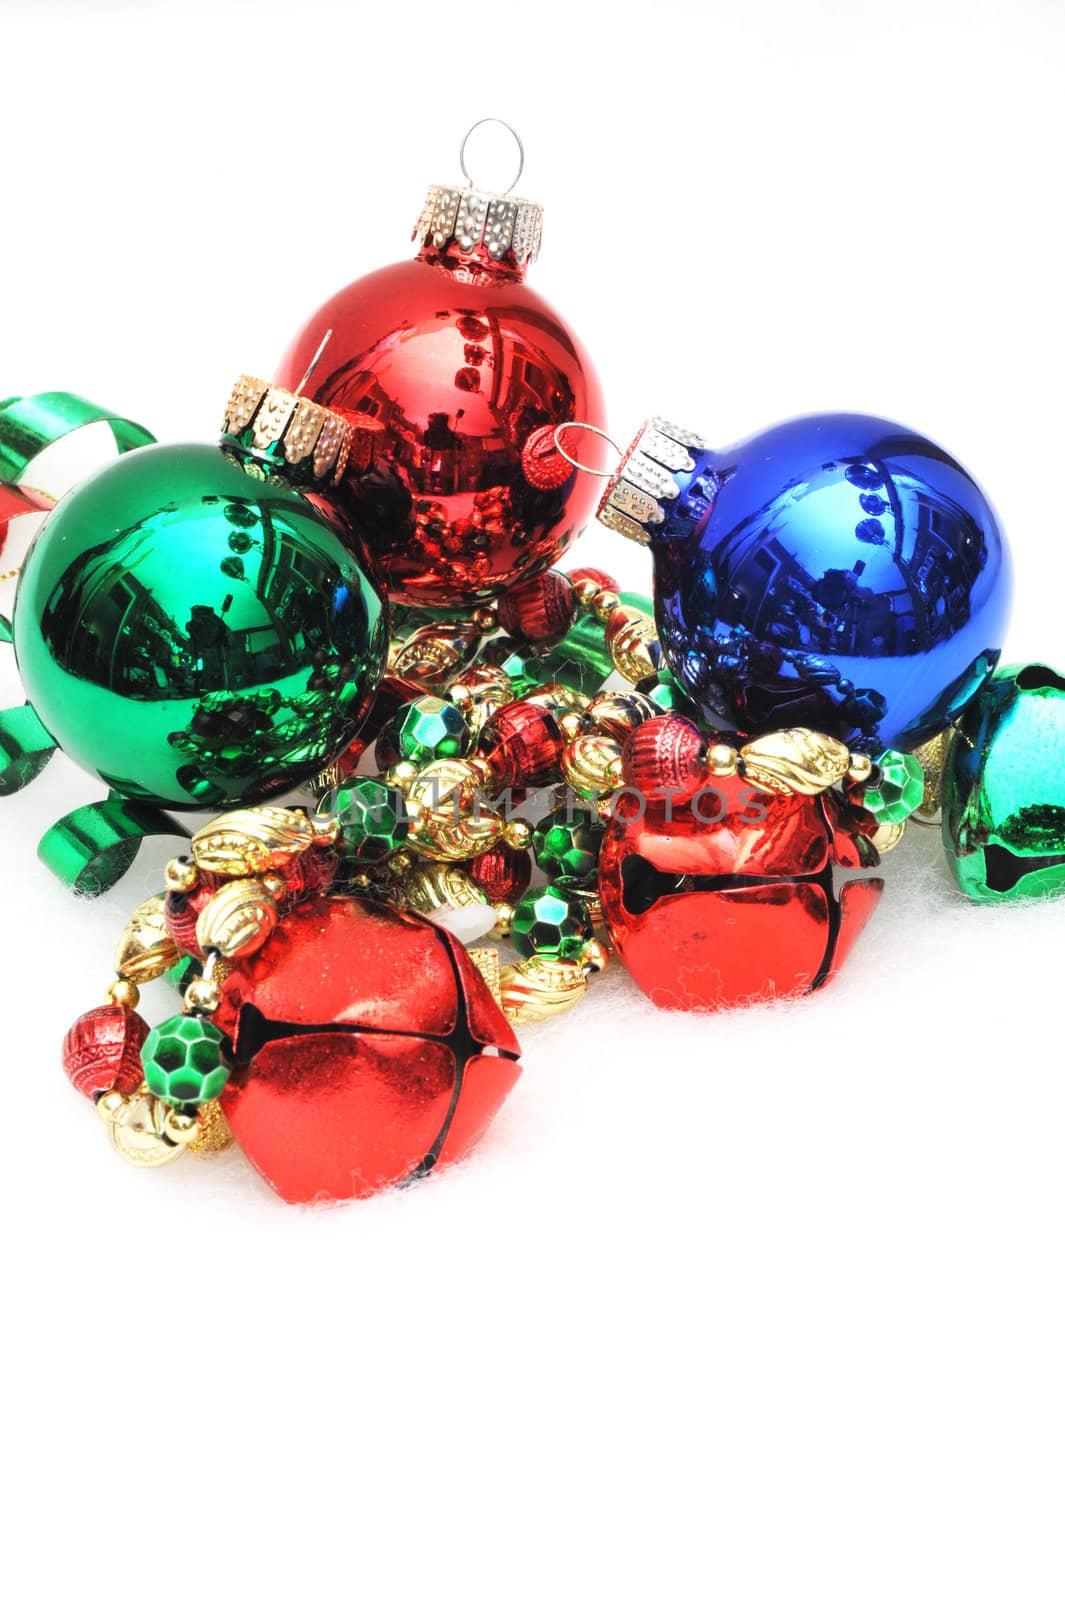 Red, green and blue ornaments and jingle bells